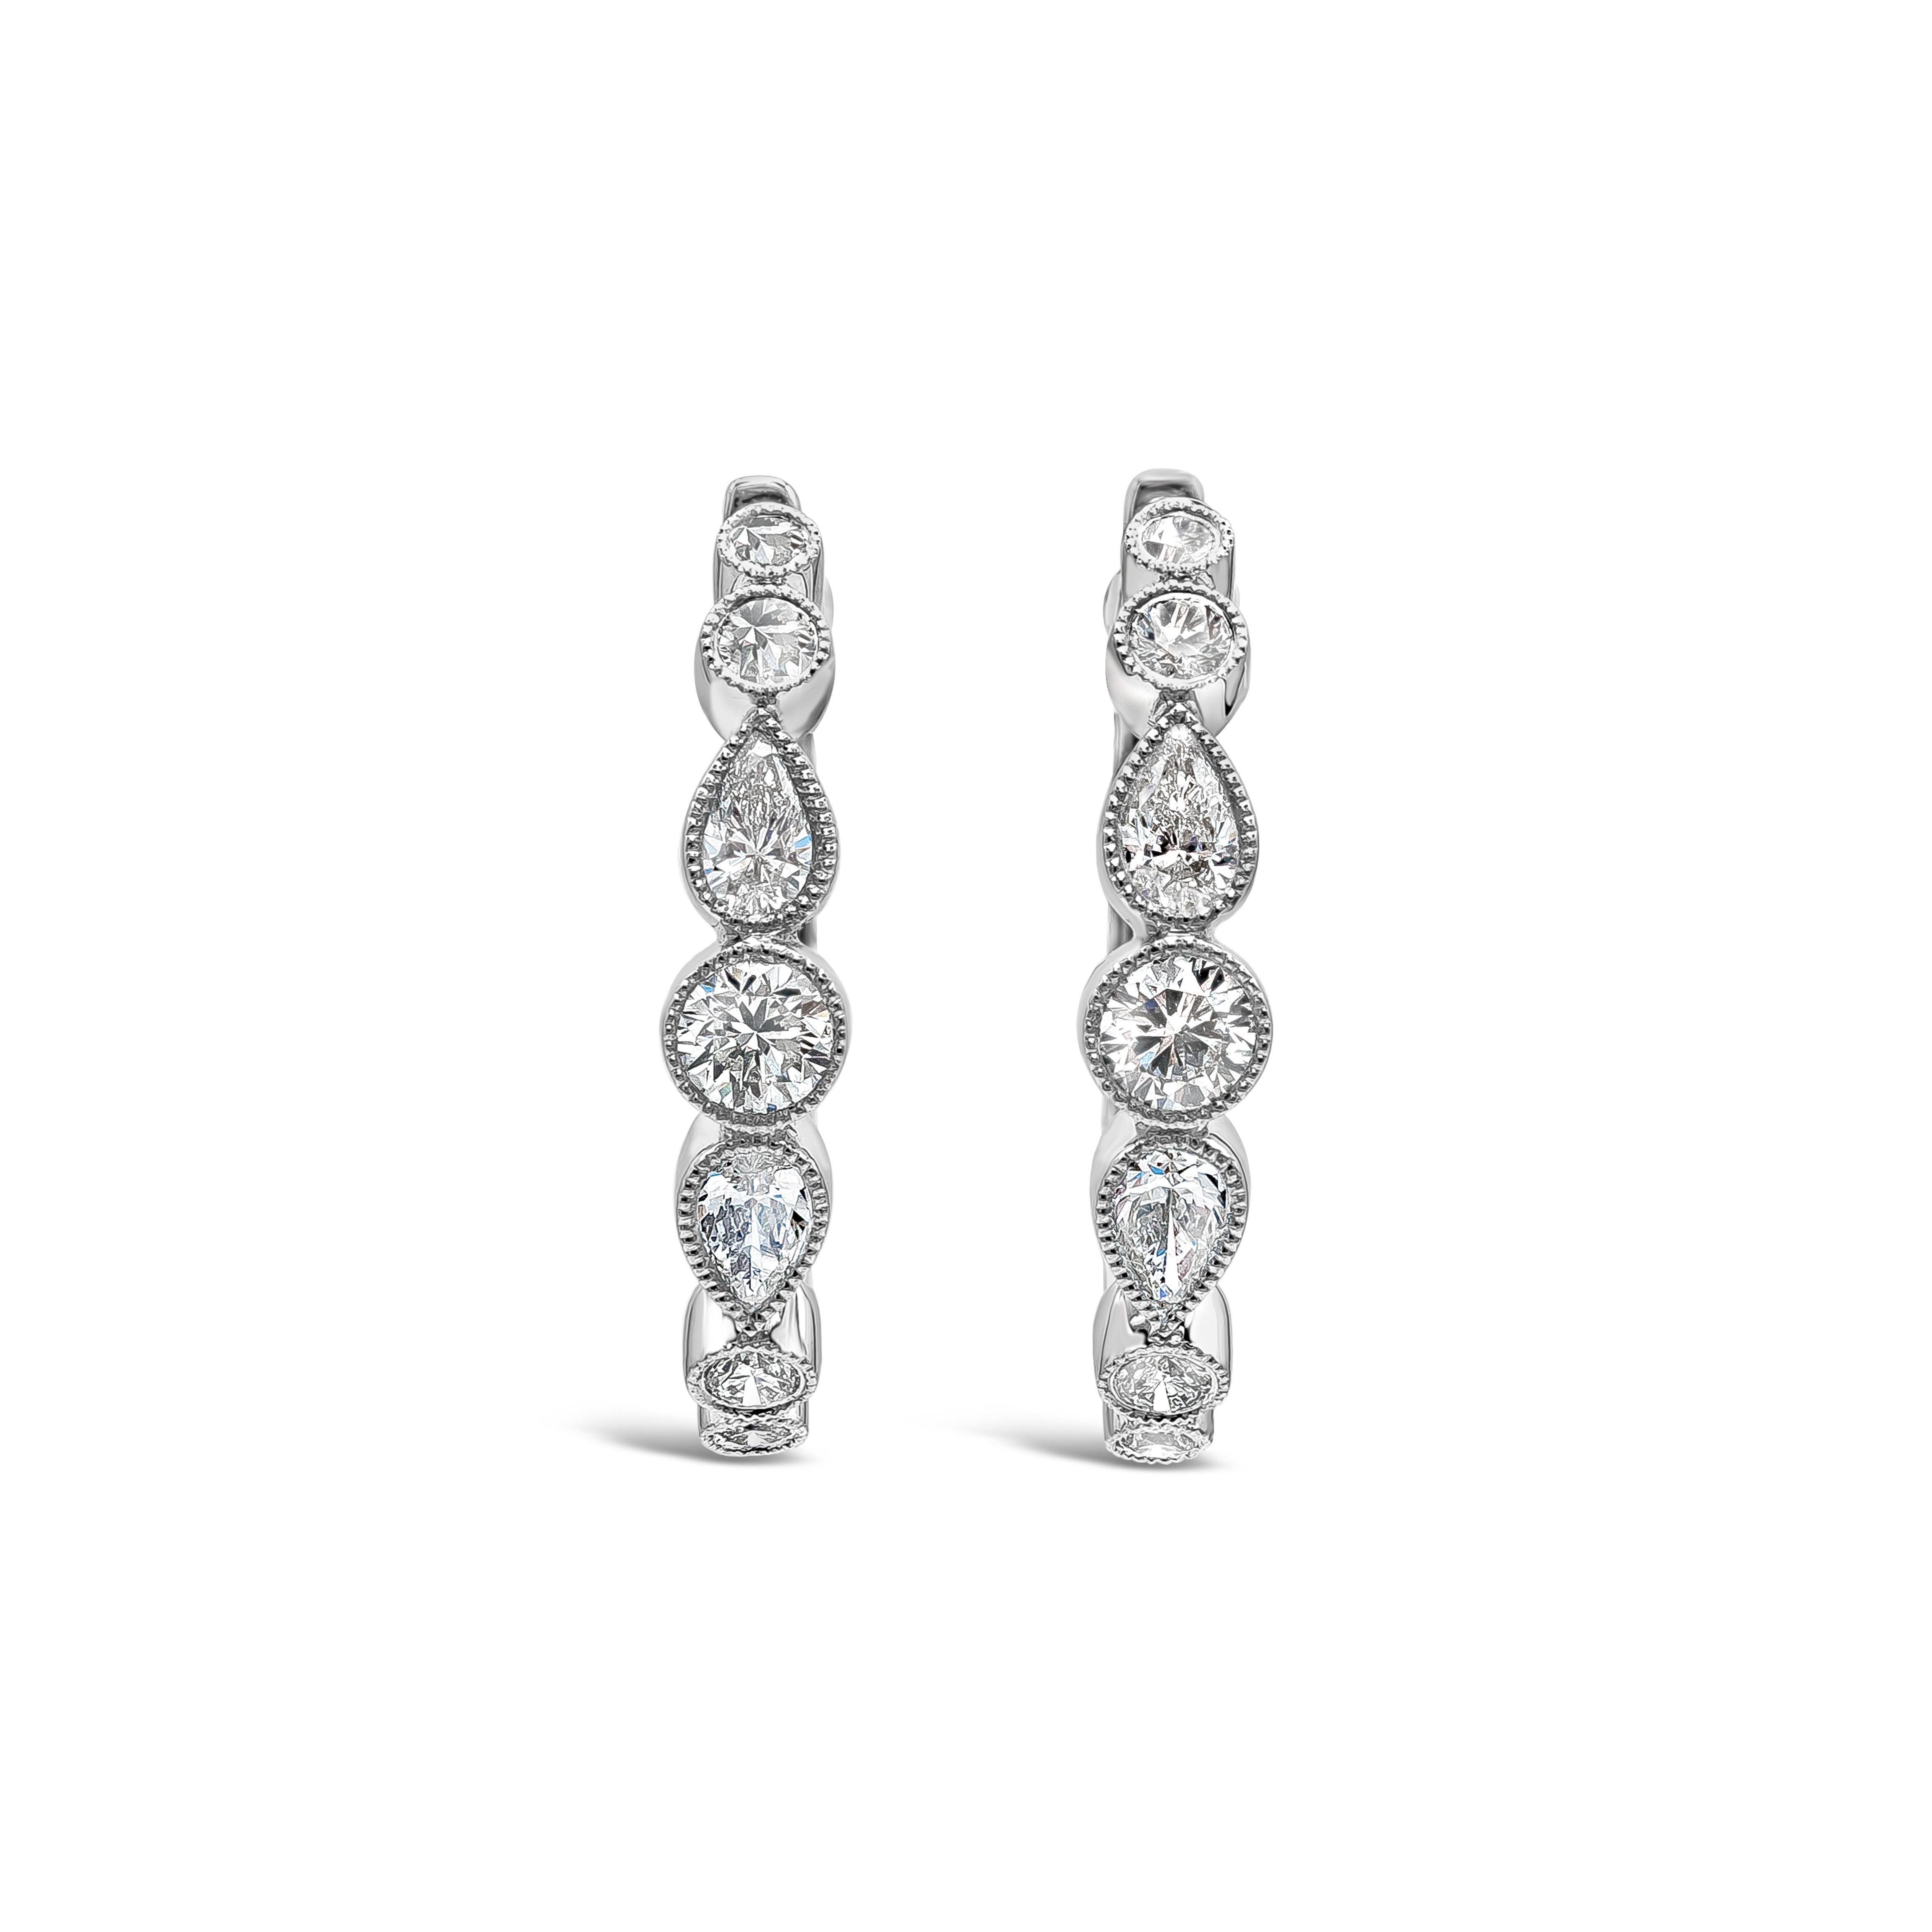 A unique piece of hoop earrings showcasing a row of alternating round and pear shape diamonds, Diamonds weigh 0.78 carats total and are approximately F-G color, VS-SI clarity. Set in a milgrain bezel made in 18k white gold. 

Roman Malakov is a